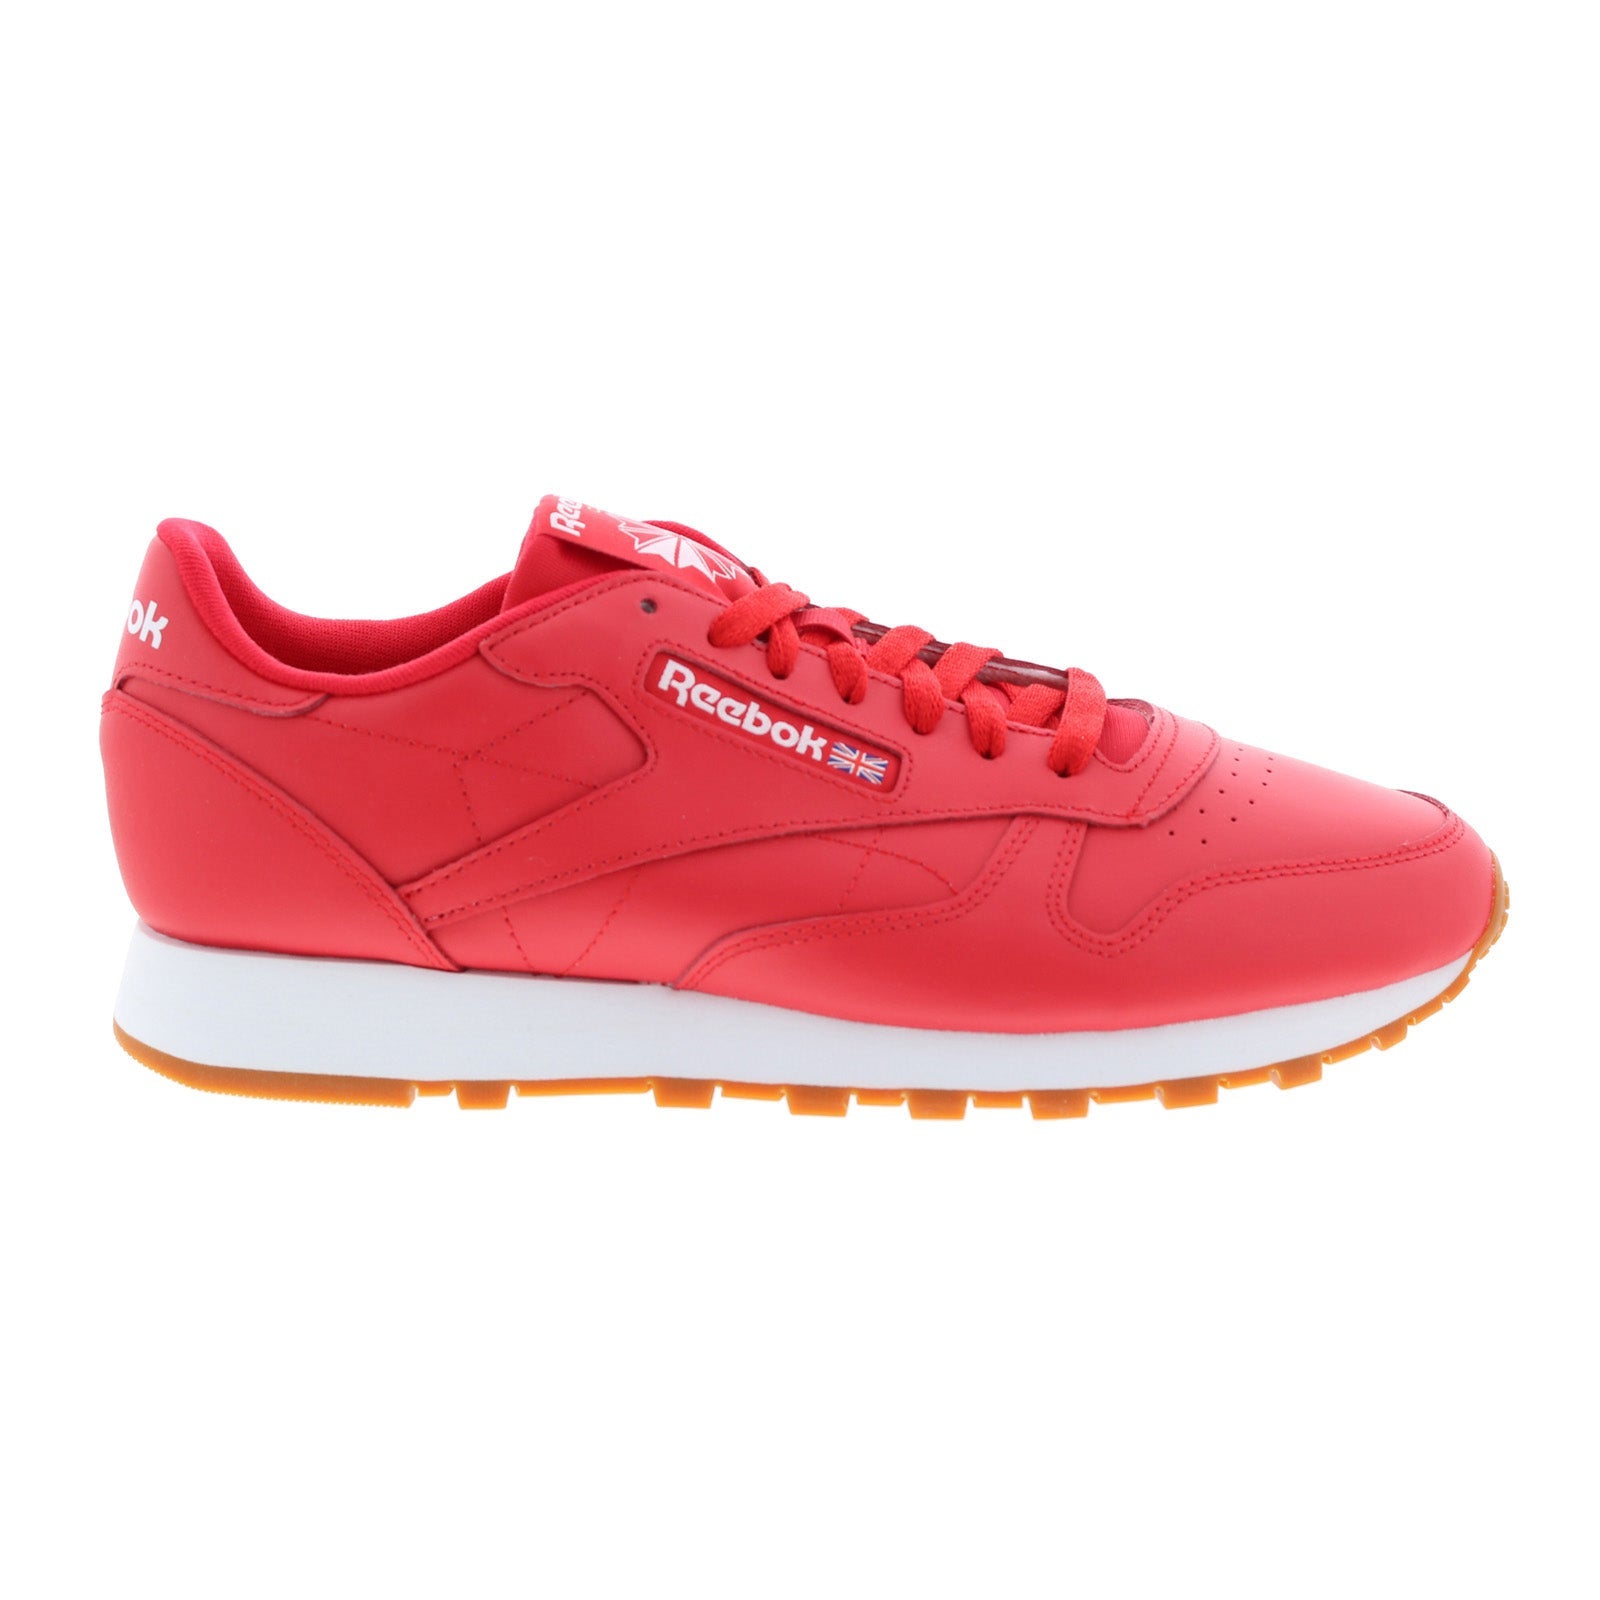 Outlaw Energize Forskel Reebok Classic Leather GY3601 Mens Red Lace Up Lifestyle Sneakers Shoe -  Ruze Shoes